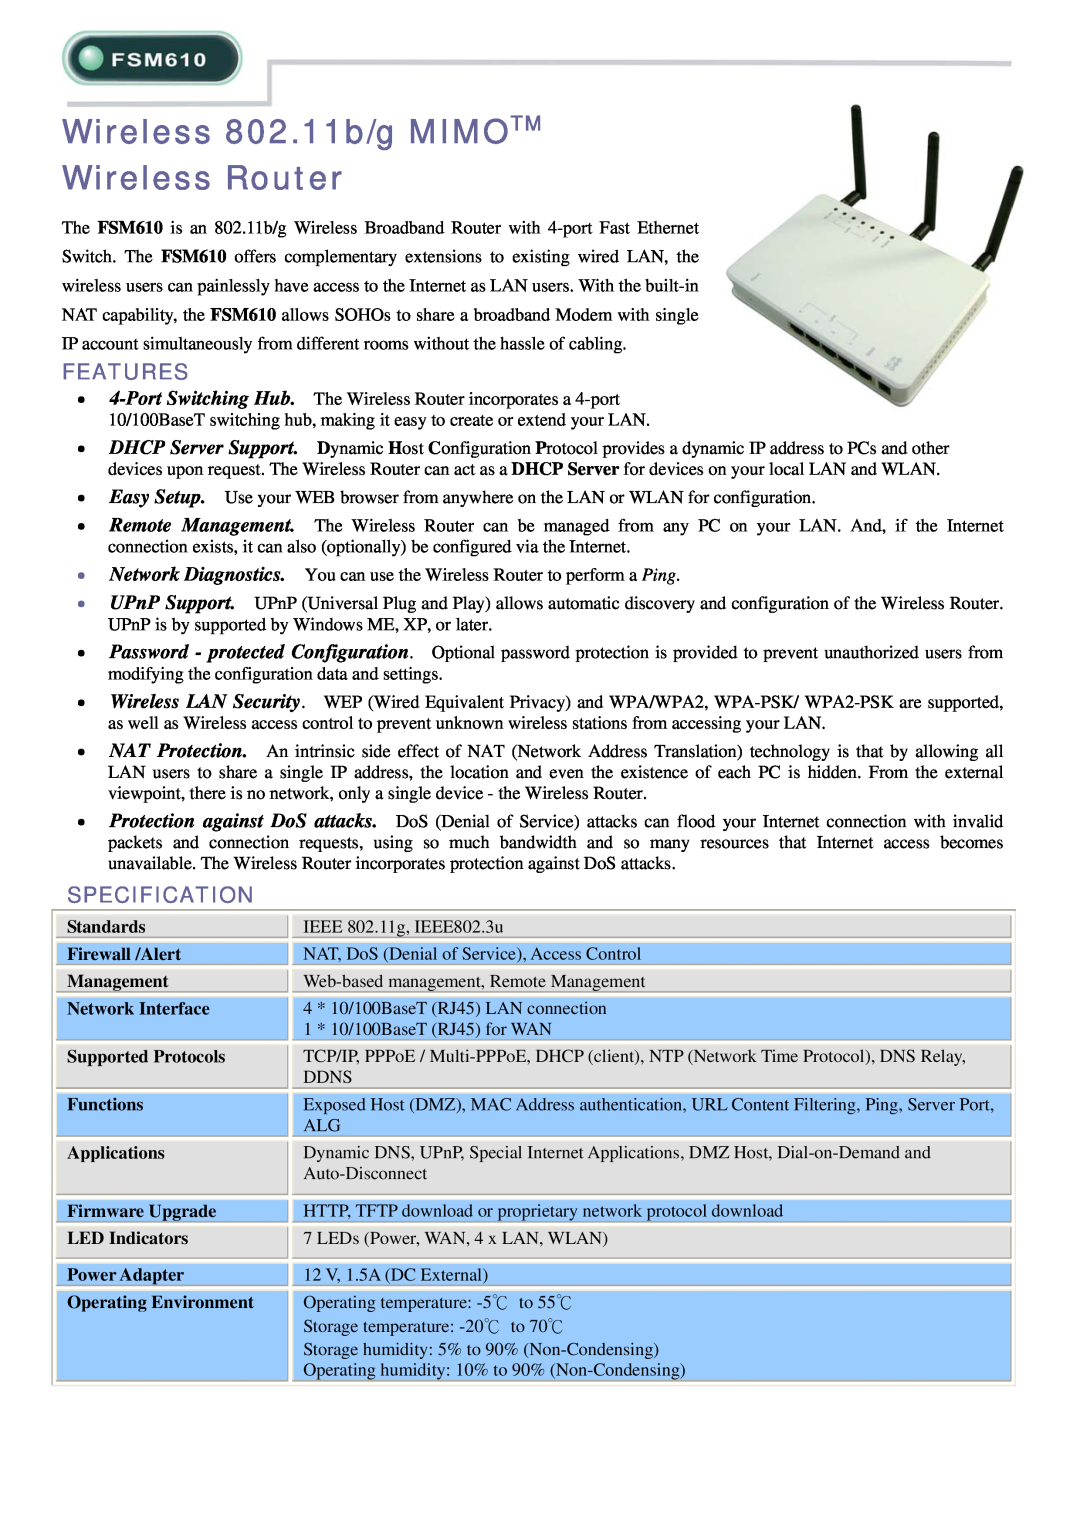 Abocom FSM610 specifications Wireless 802.11b/g MIMOTM Wireless Router, Features, Specification, Supported Protocols 